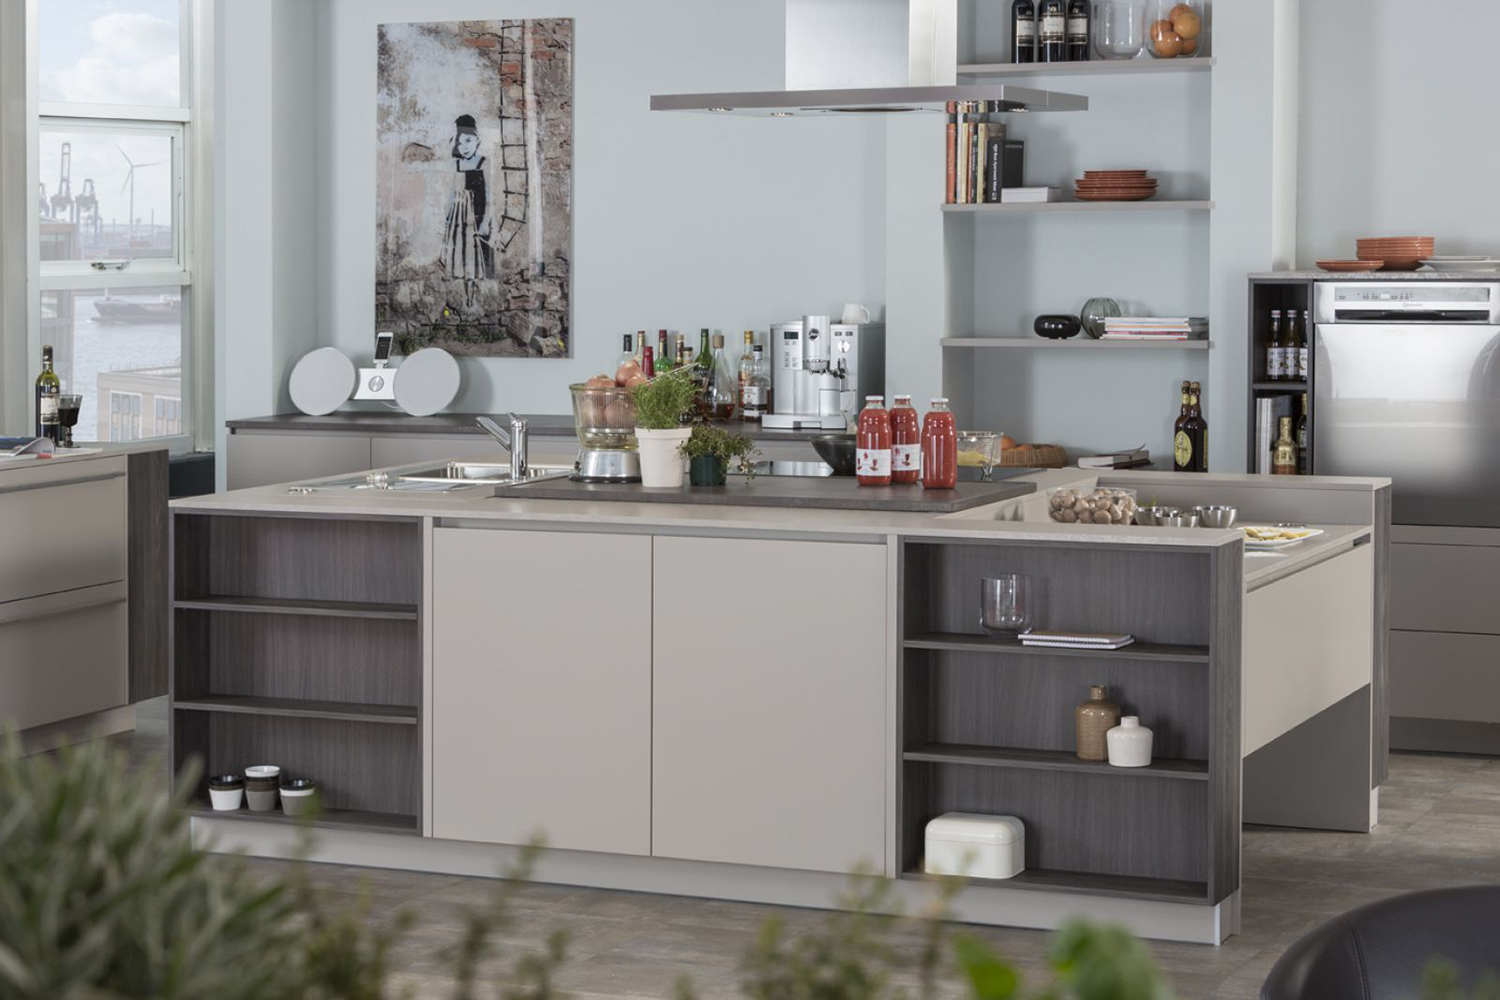 tielsa makes height adjustable counters for kitchens tura